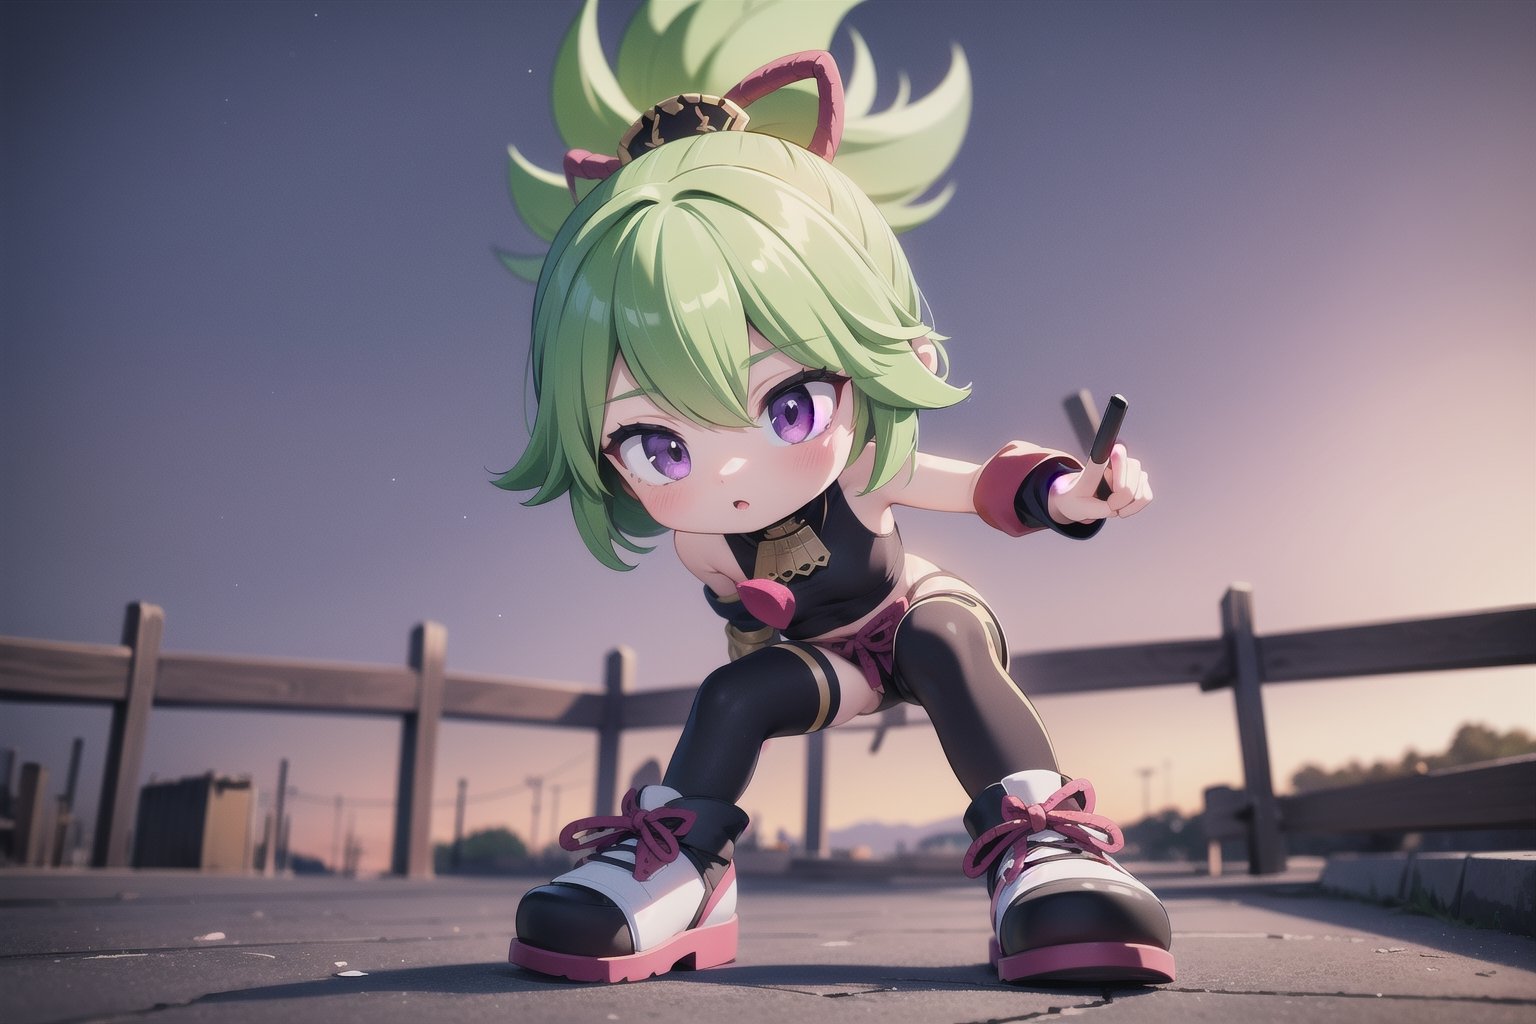 little kukishinobudef, little (full body view of lora:kukishinobu2-000014:1), (masterpiece), best quality, HDR, 32k UHD, Ultra realistic, highres, highly detailed, ultra_hd, high resolution, ultra_detailed, hyper realistic, extemely detailed background, detailed_background, complex_background, depth_of_field, extremely detailed and complex, outdoor, little (Super Sonic), show yourself as (Super Sonic), show me your (Super Sonic) costume, creating an atmosphere in Mobius, creating an atmosphere at Mobius, the background is filled with smoke and destruction, (axt kick), 